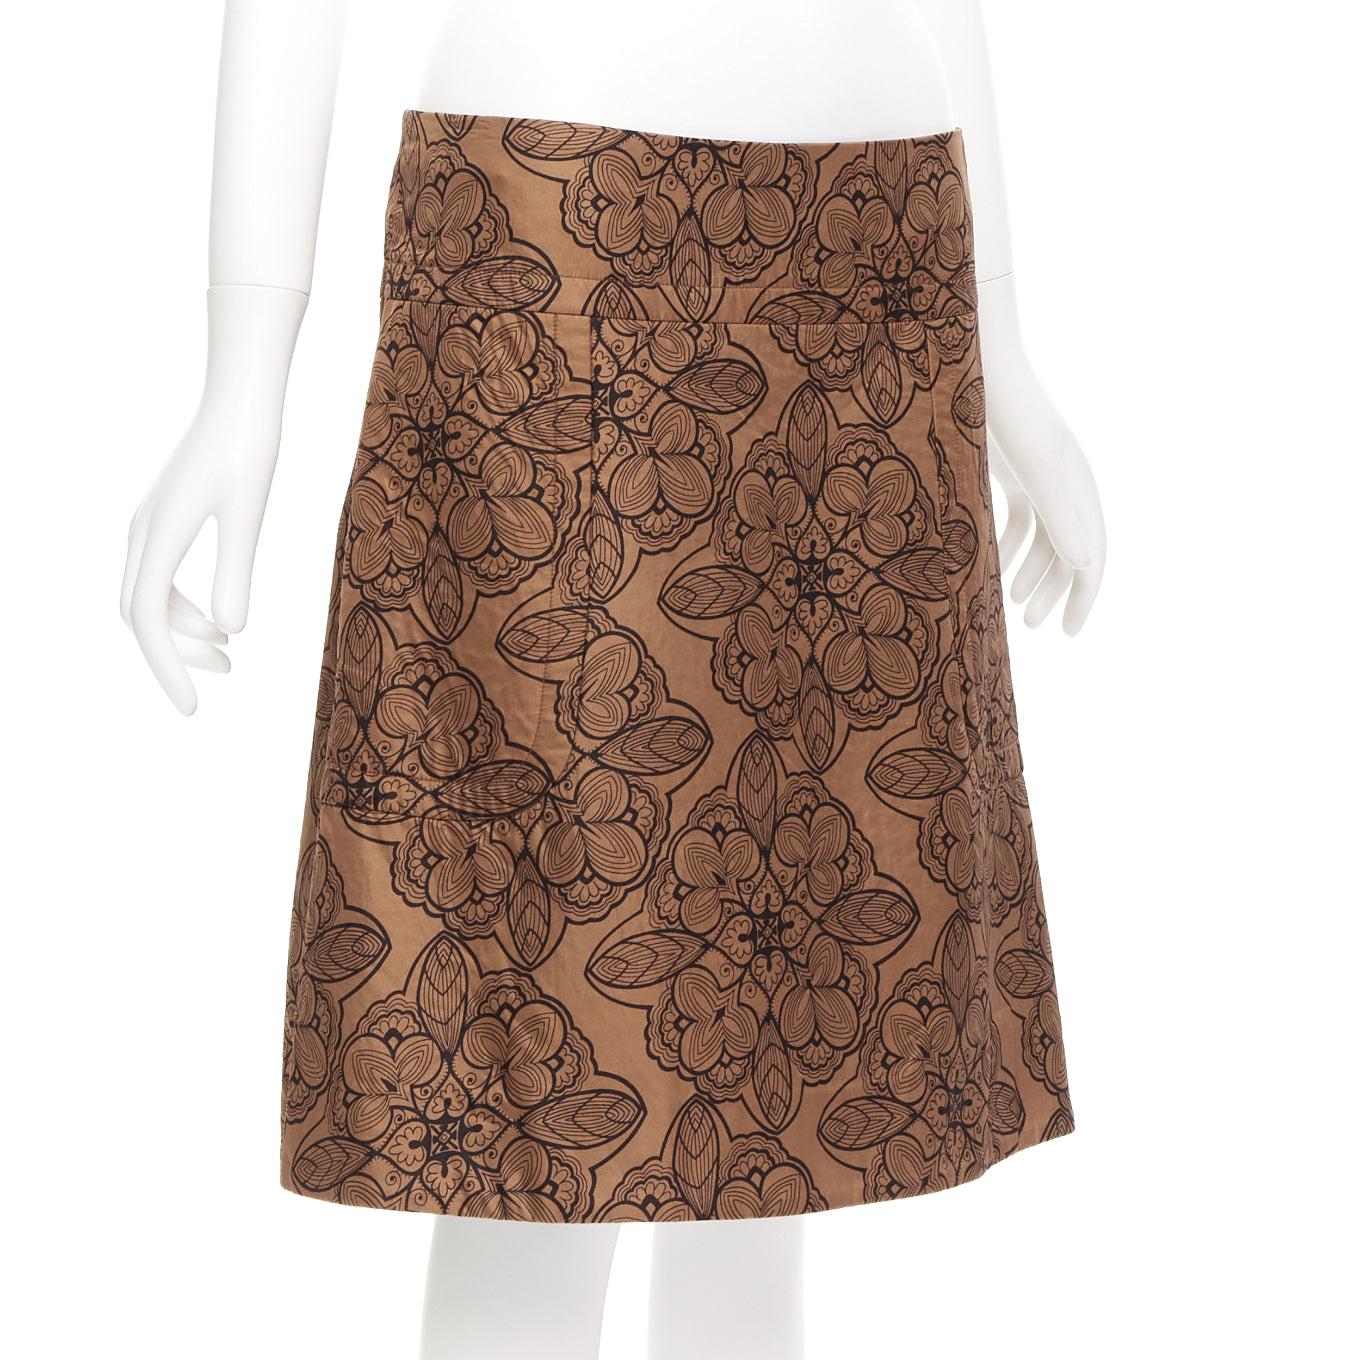 MARNI brown cotton silk blend floral illustration jersey lined skirt IT40 S
Reference: CELG/A00268
Brand: Marni
Material: Cotton, Silk, Blend
Color: Brown
Pattern: Floral
Closure: Zip
Lining: Grey Fabric
Extra Details: Side zip.
Made in: